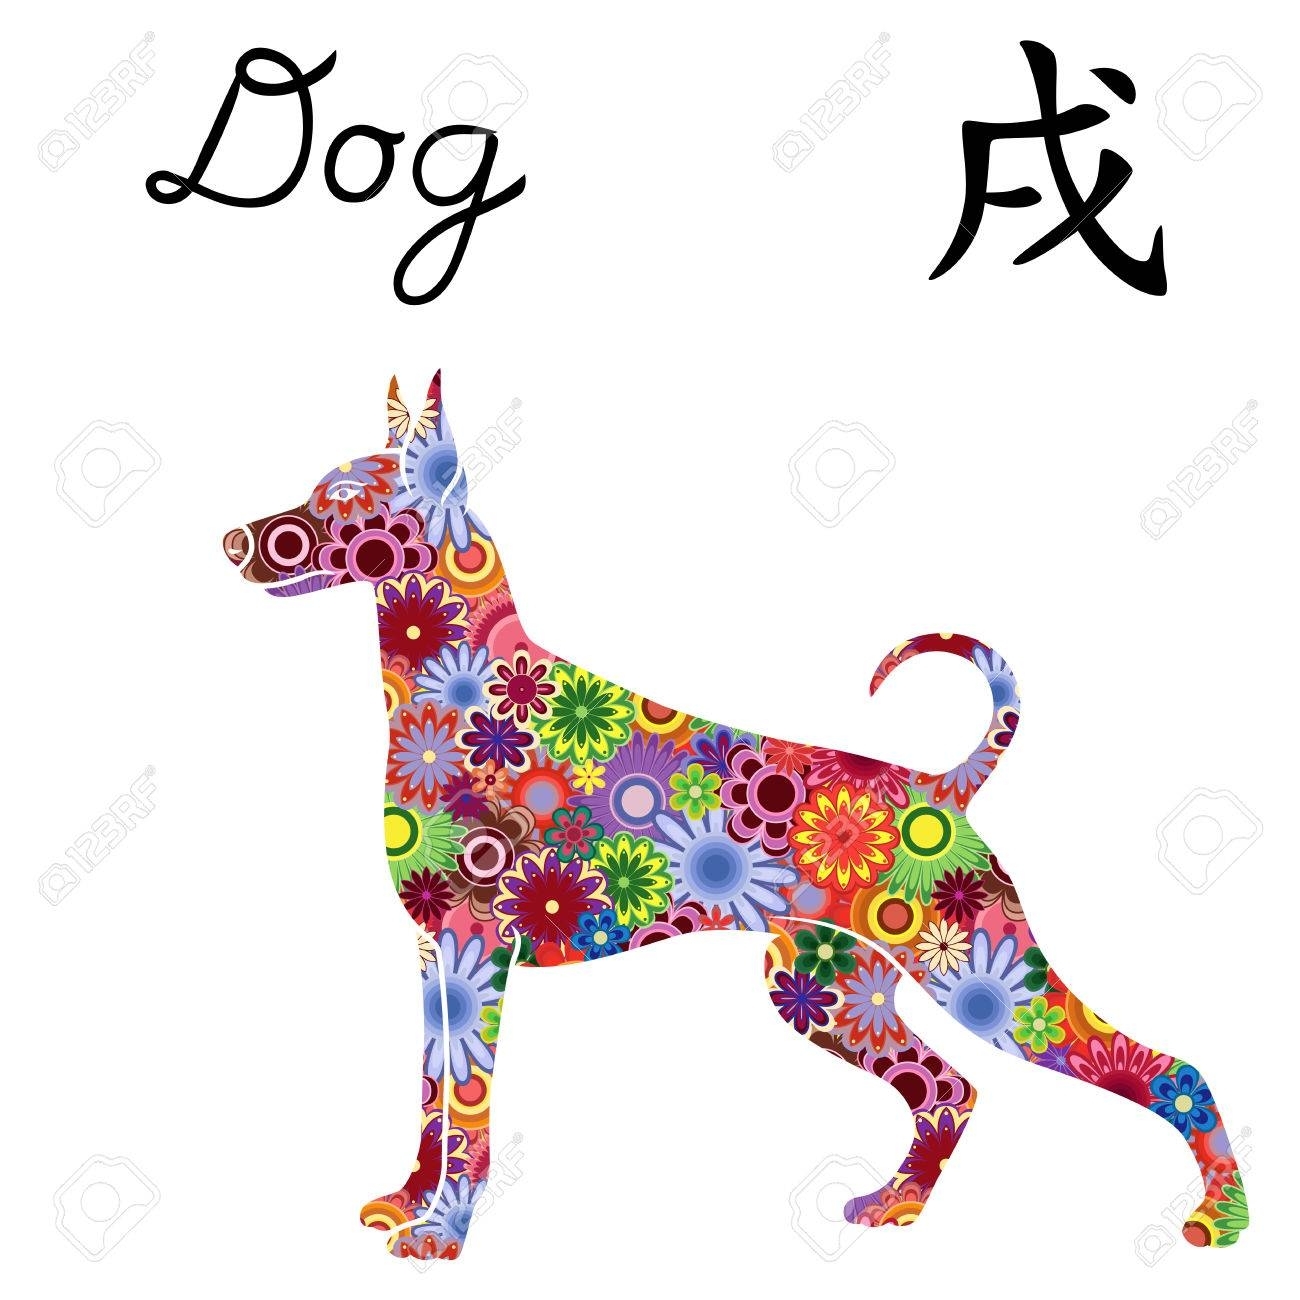 Chinese Zodiac Sign Dog, Symbol Of New Year On The Eastern Calendar,..